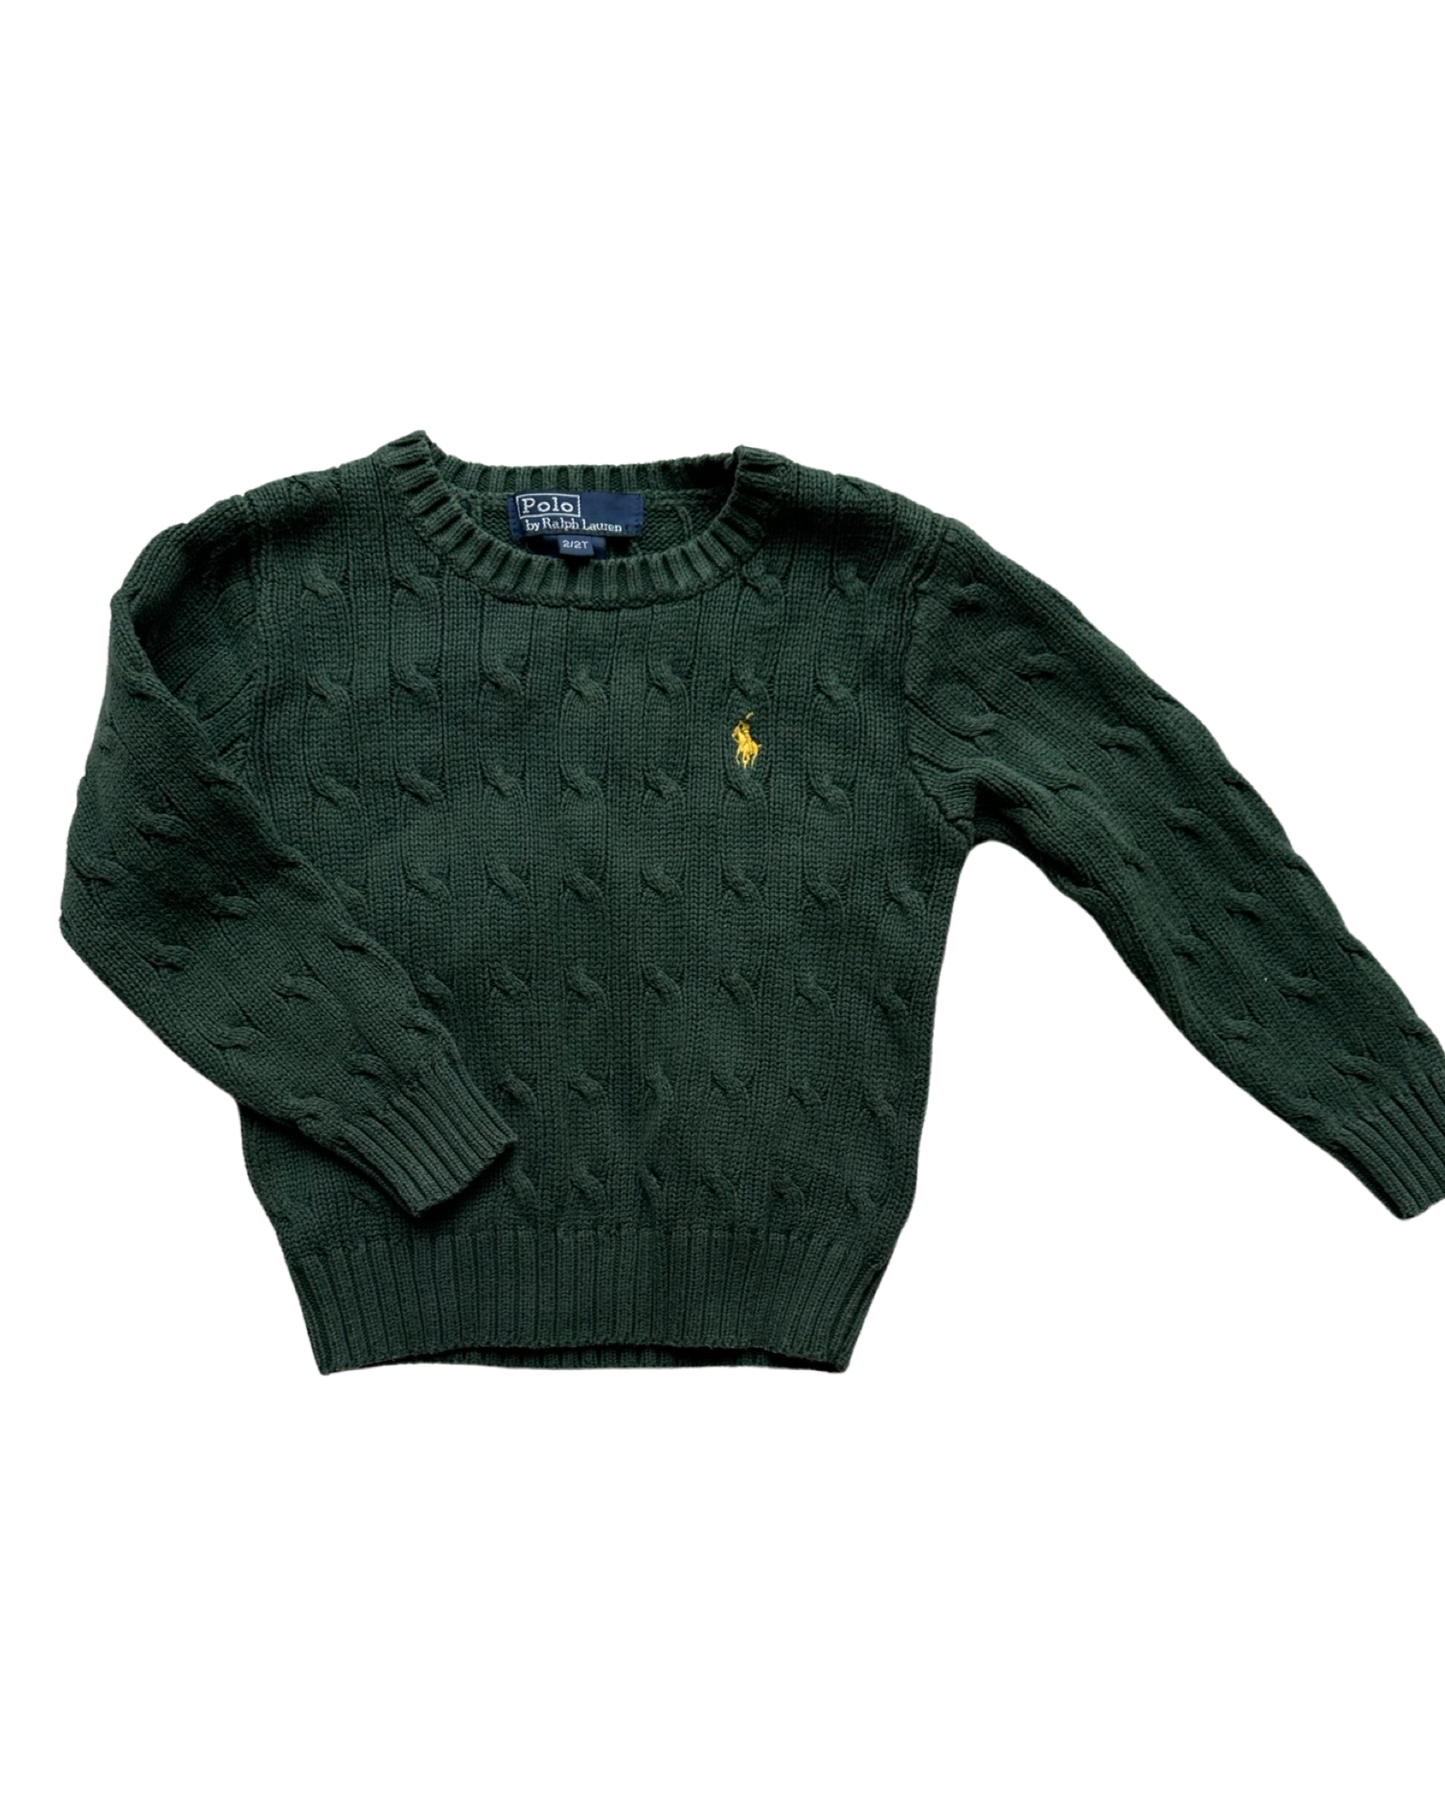 Ralph Lauren cable knit jumper in bottle green ( size 1-2yrs)